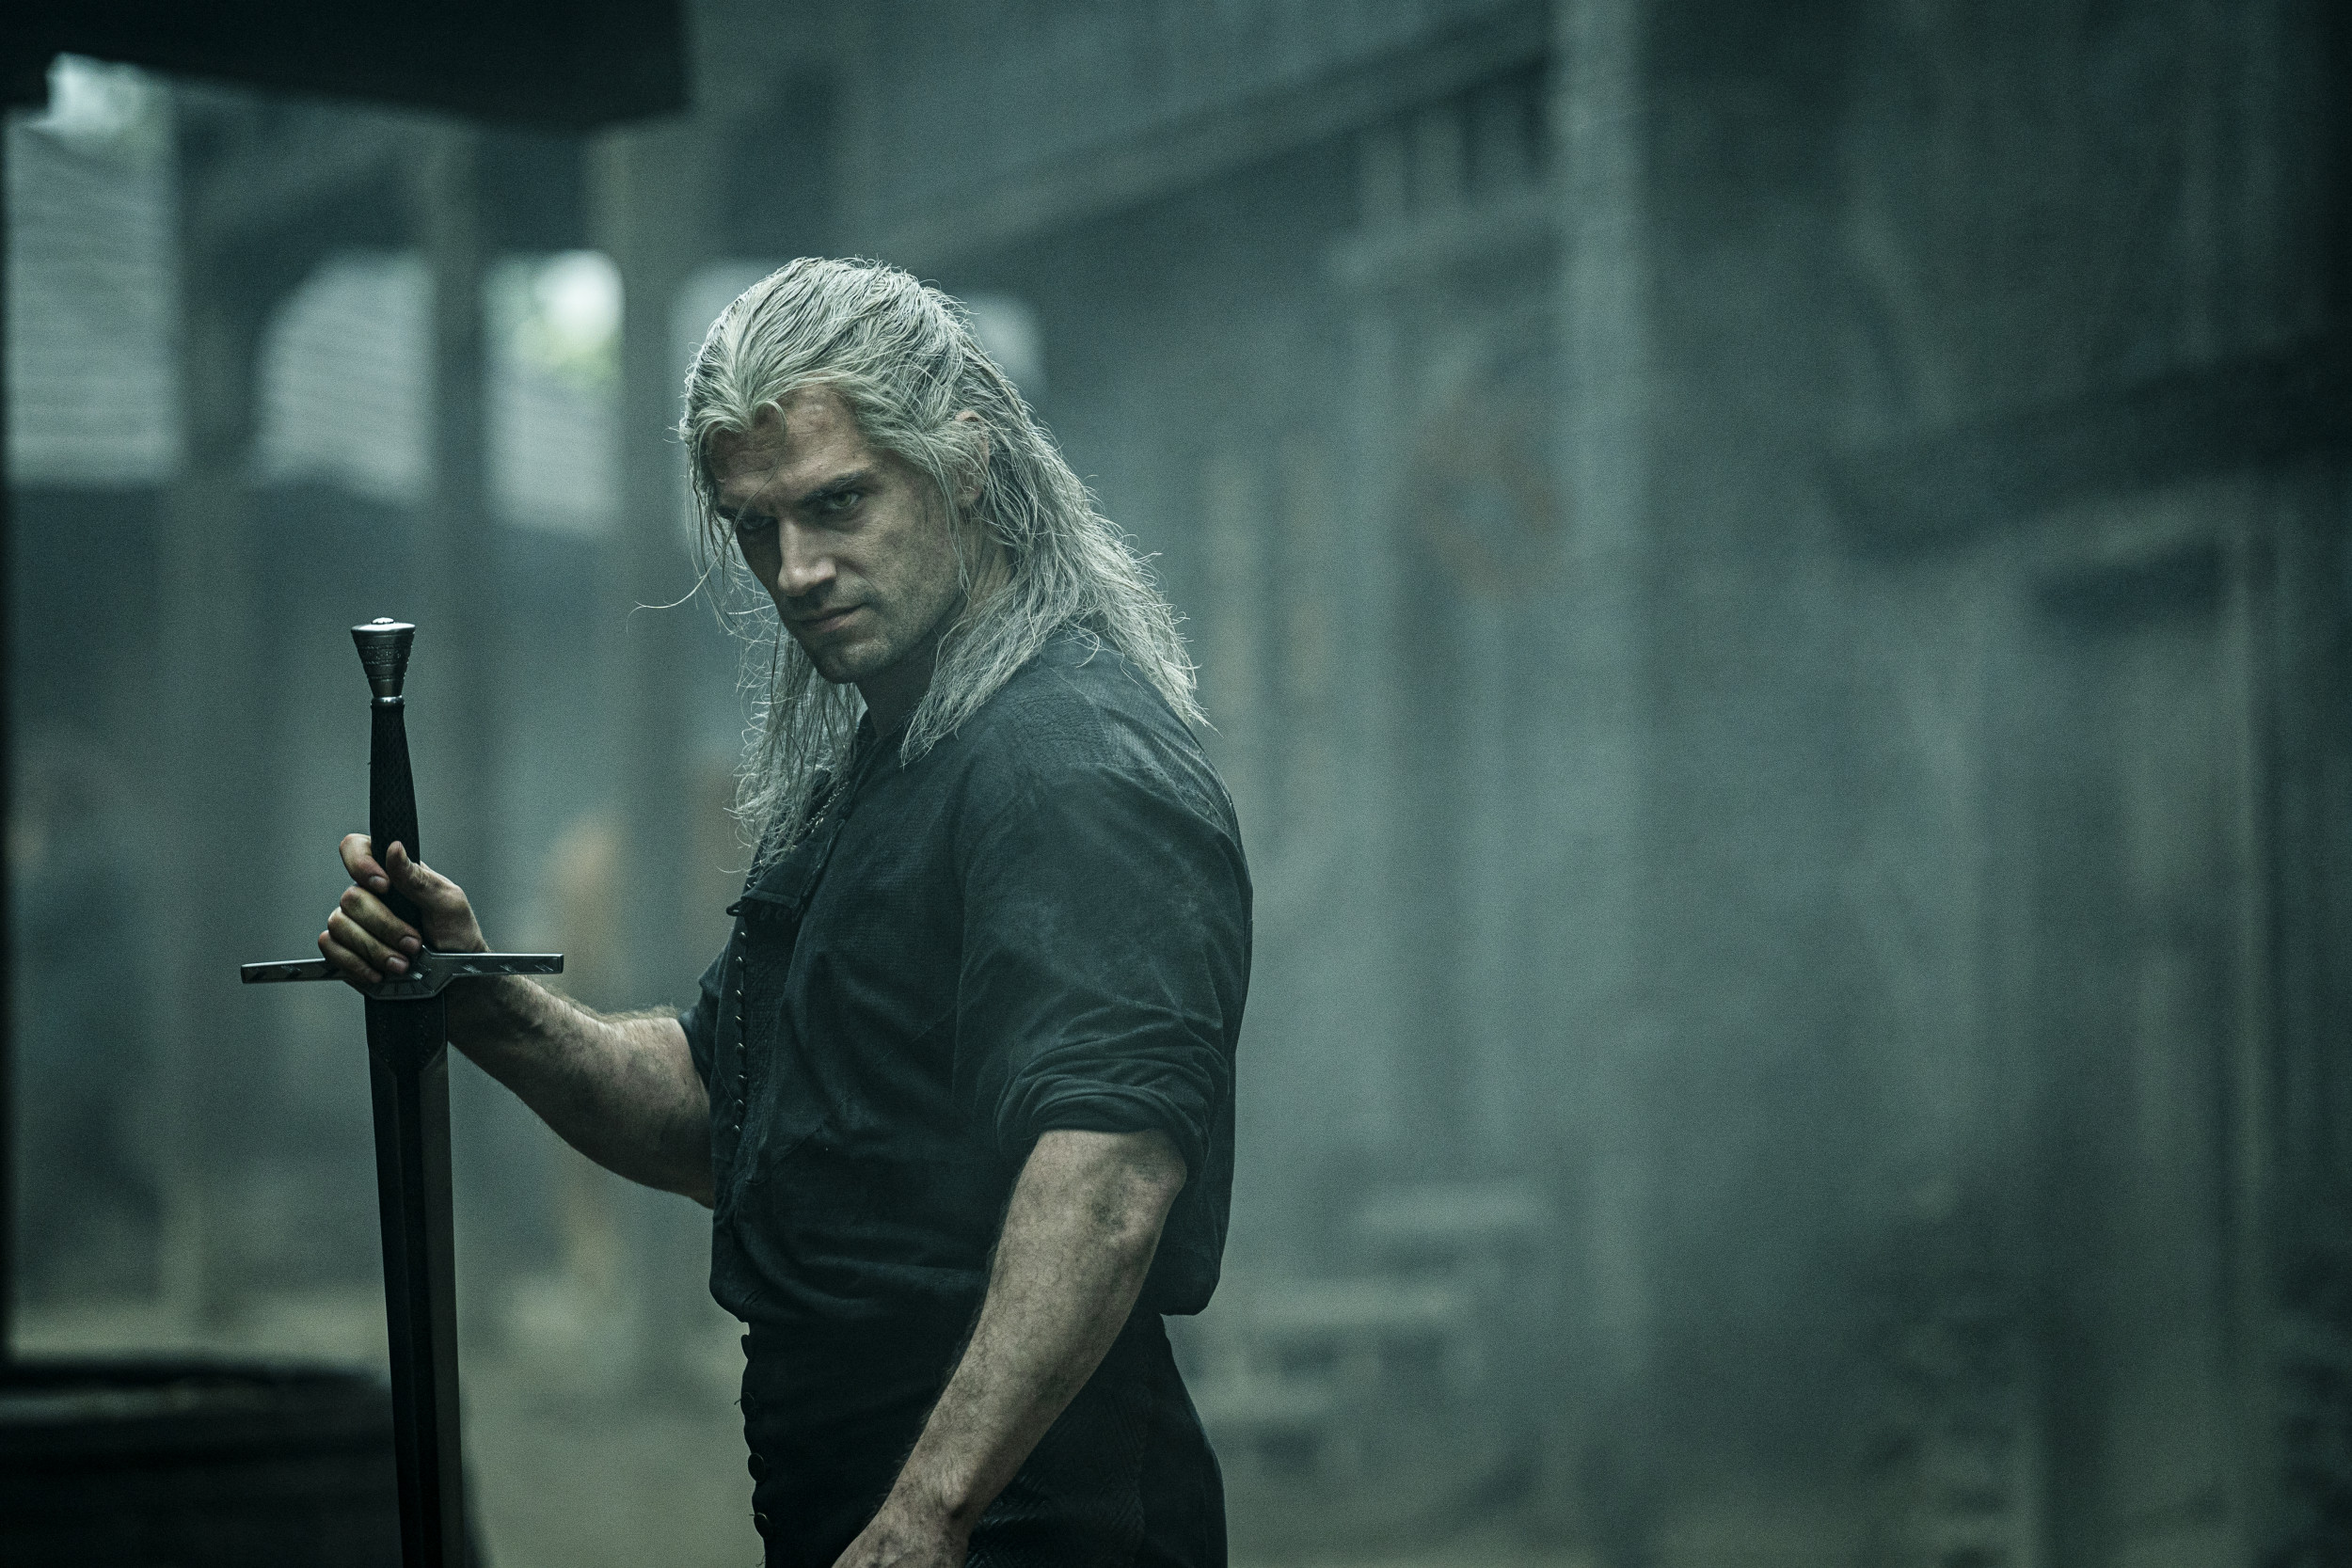 The Witcher cast - Henry Cavill, Myanna Buring, Freya Allan and Anya  Chalotra in the Netflix drama